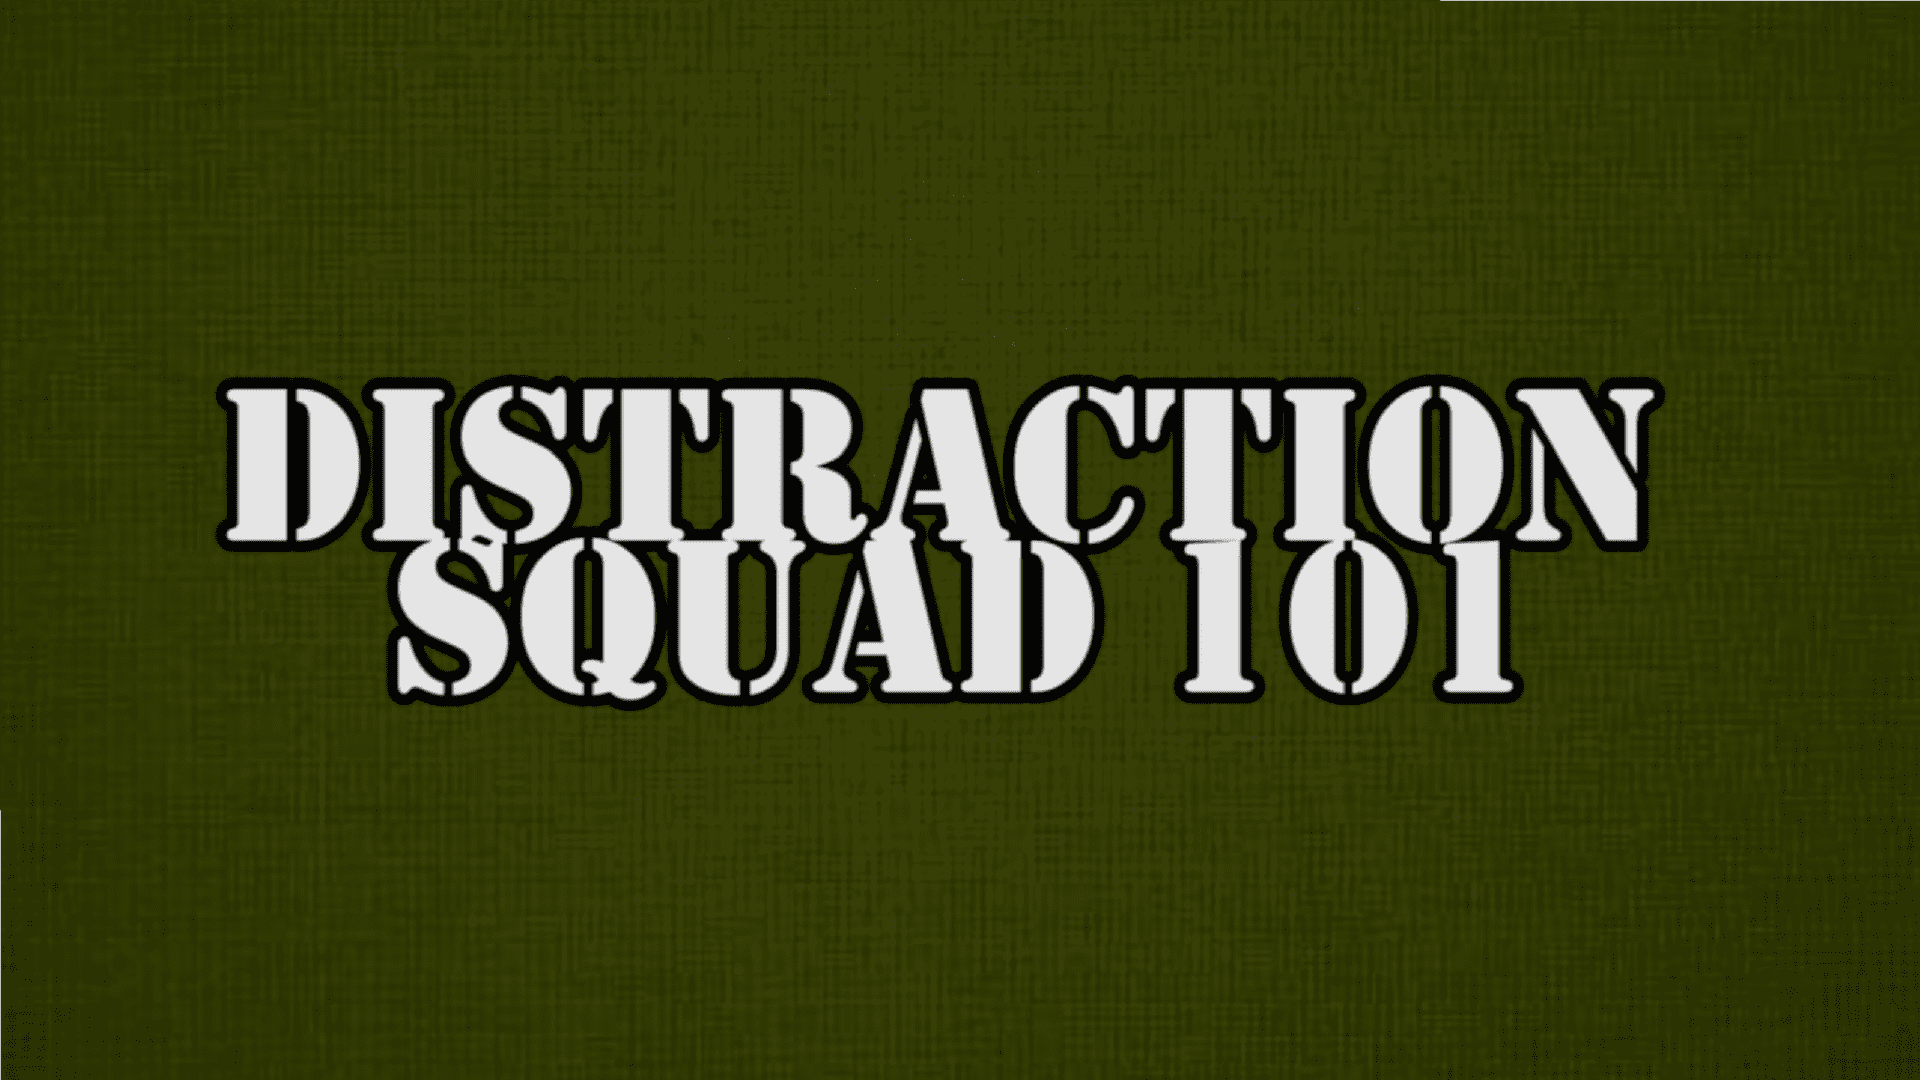 Distraction Squad 101: Two For One